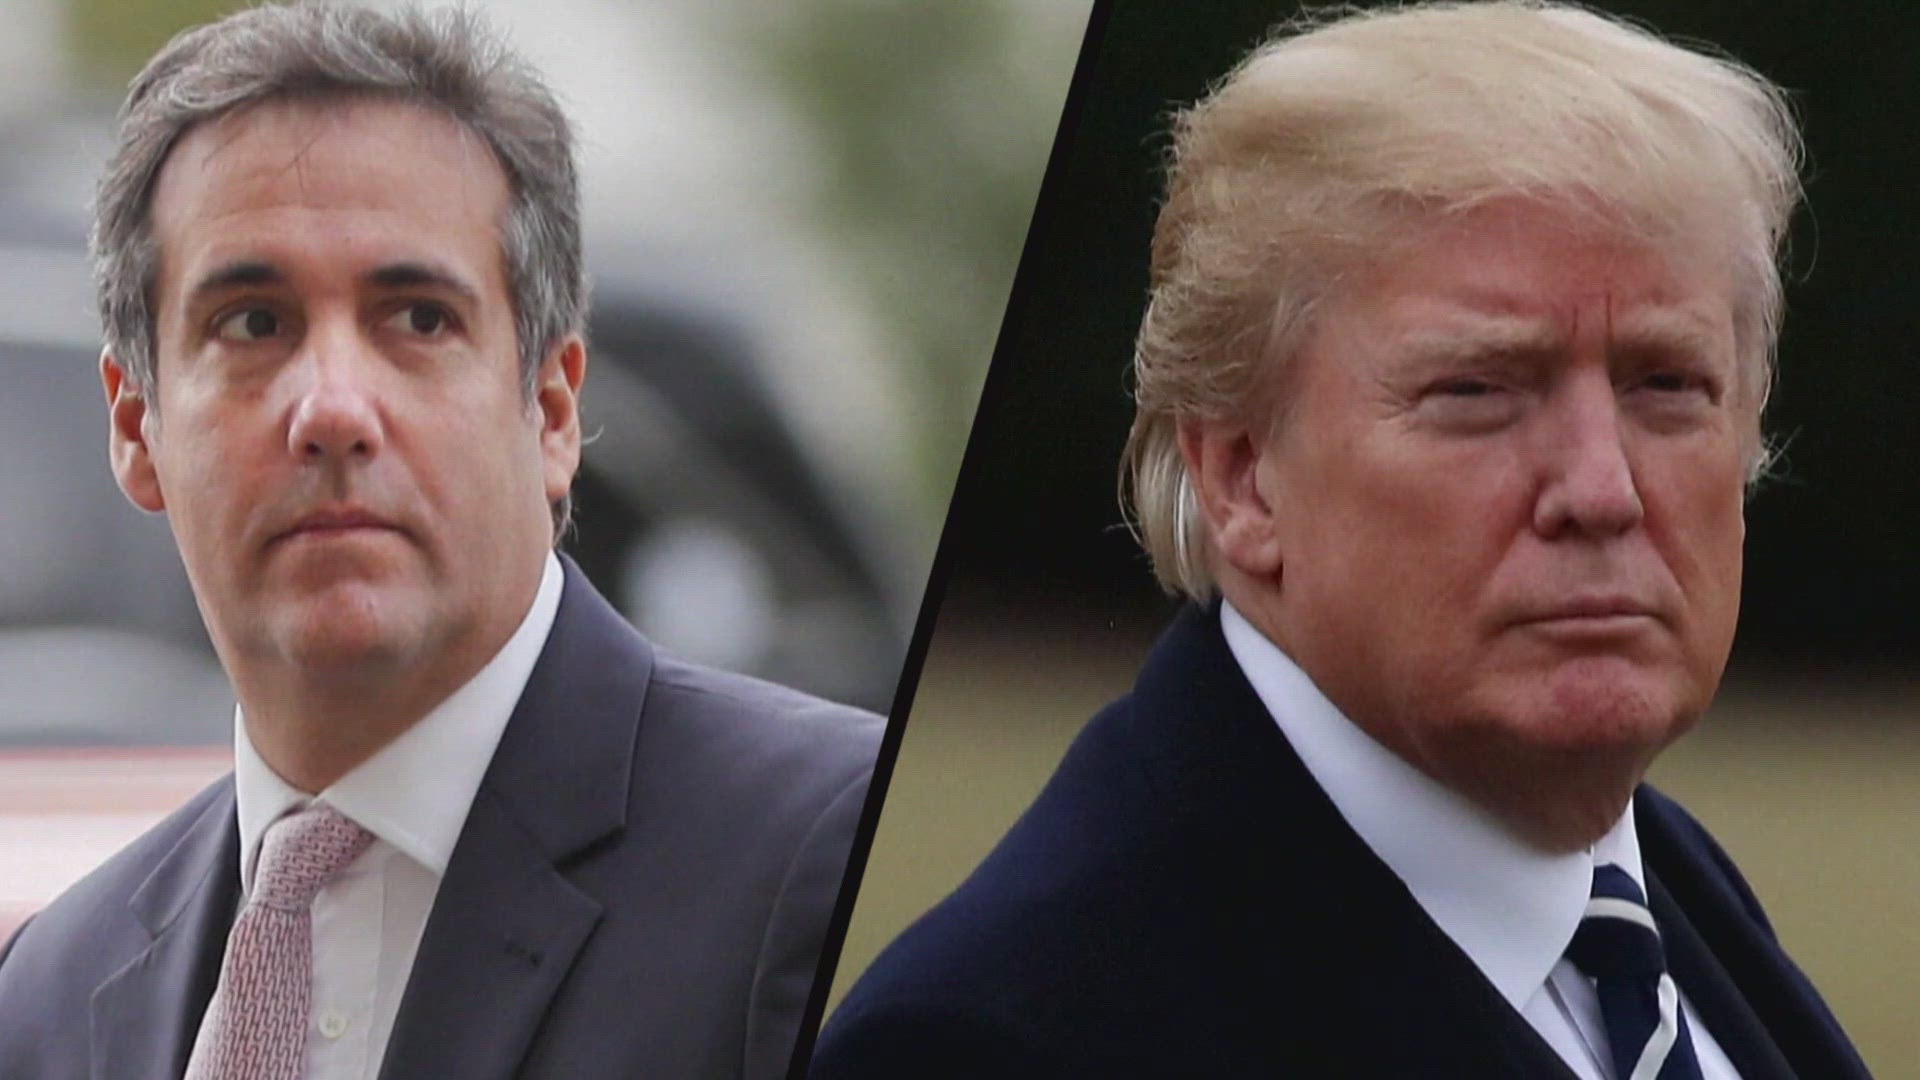 Trump's former fixer Michael Cohen is set to return to the stand Monday.